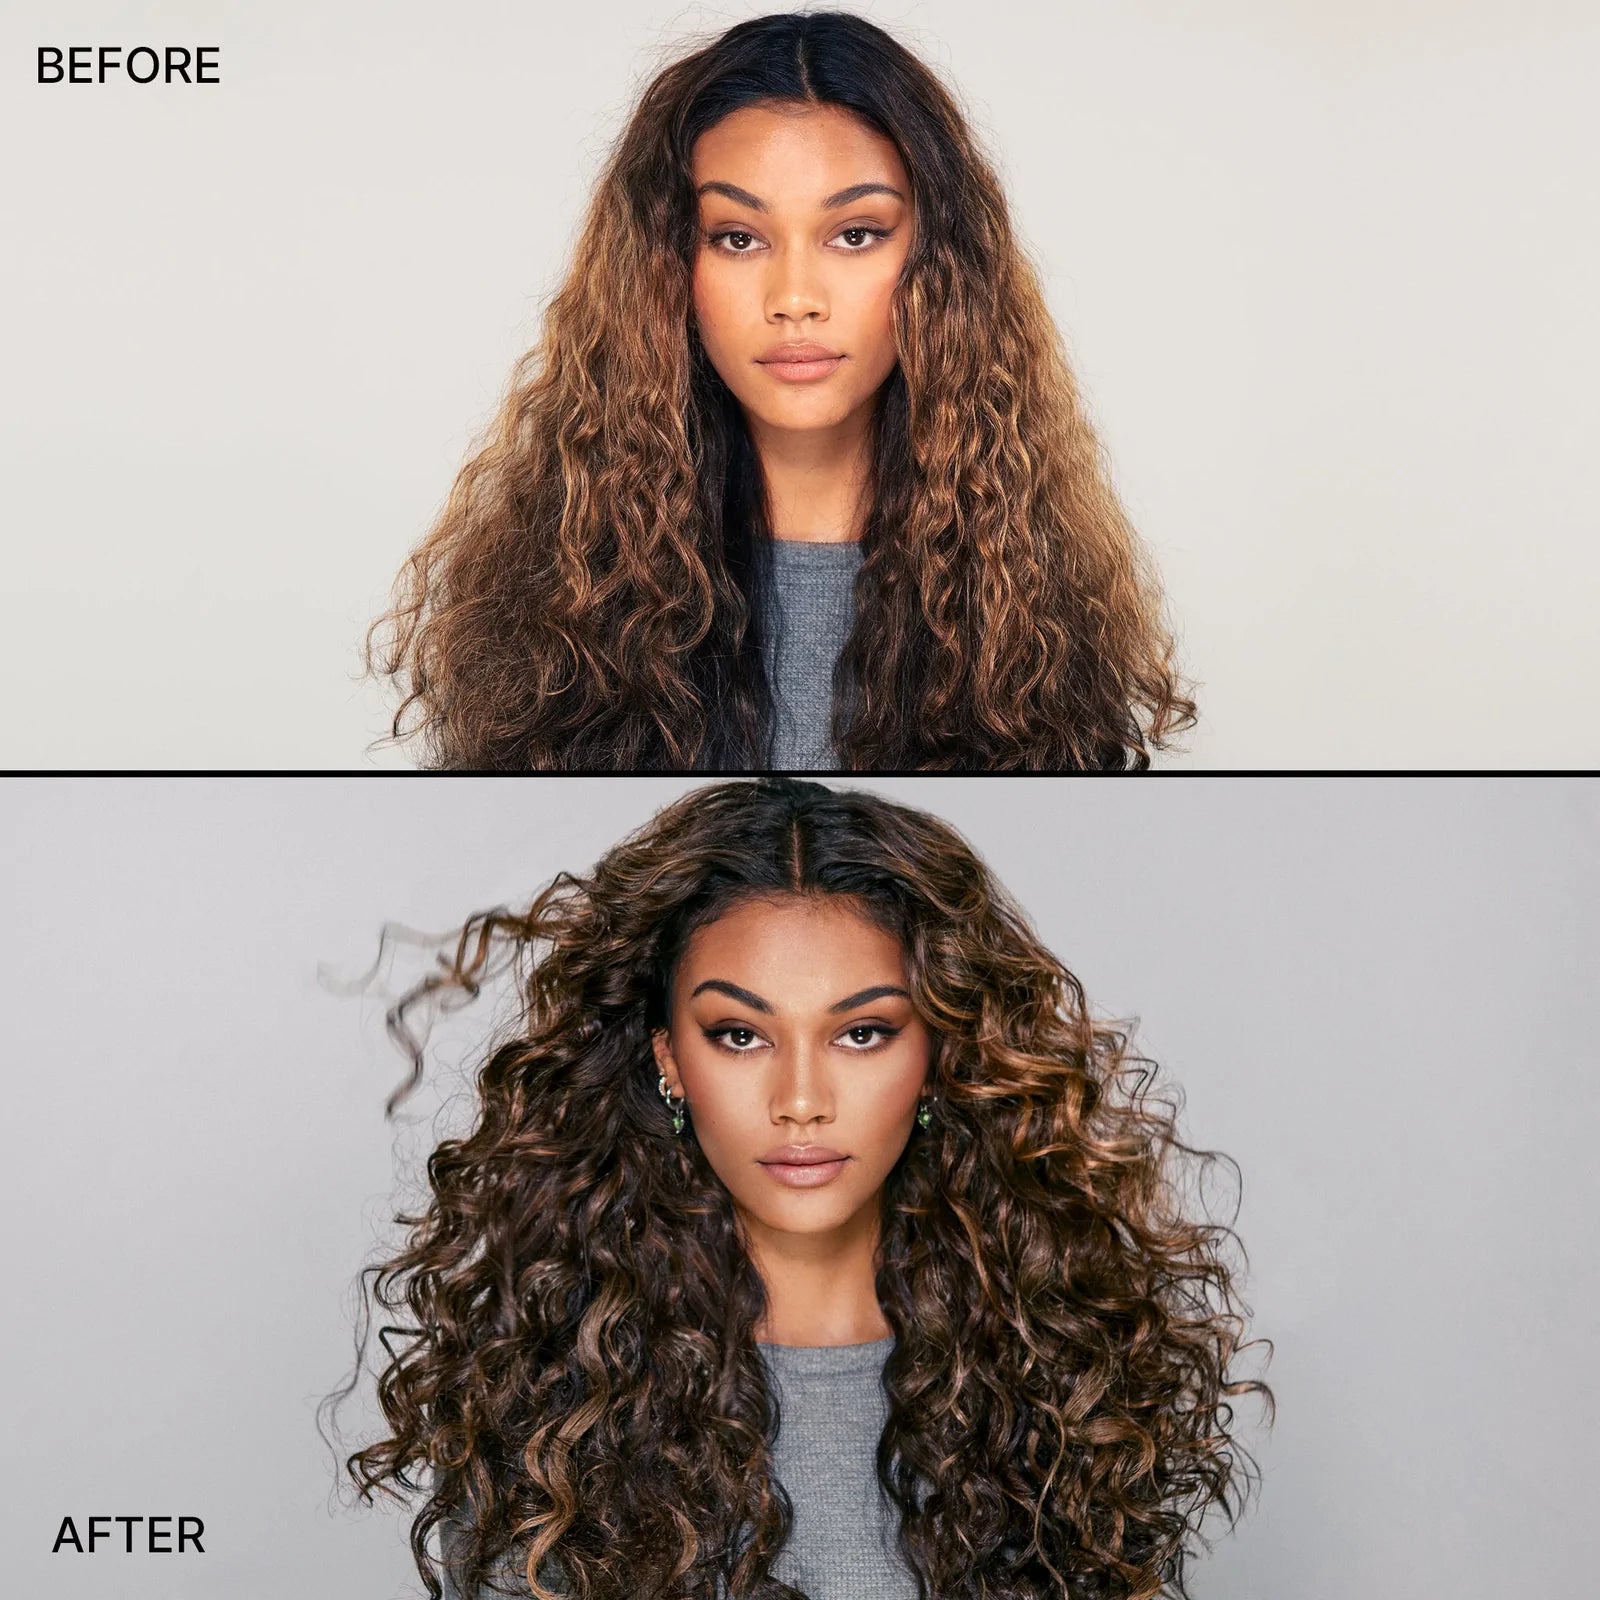 Curly model before and after using Color Wow Chris Appleton + Color Wow Money Masque